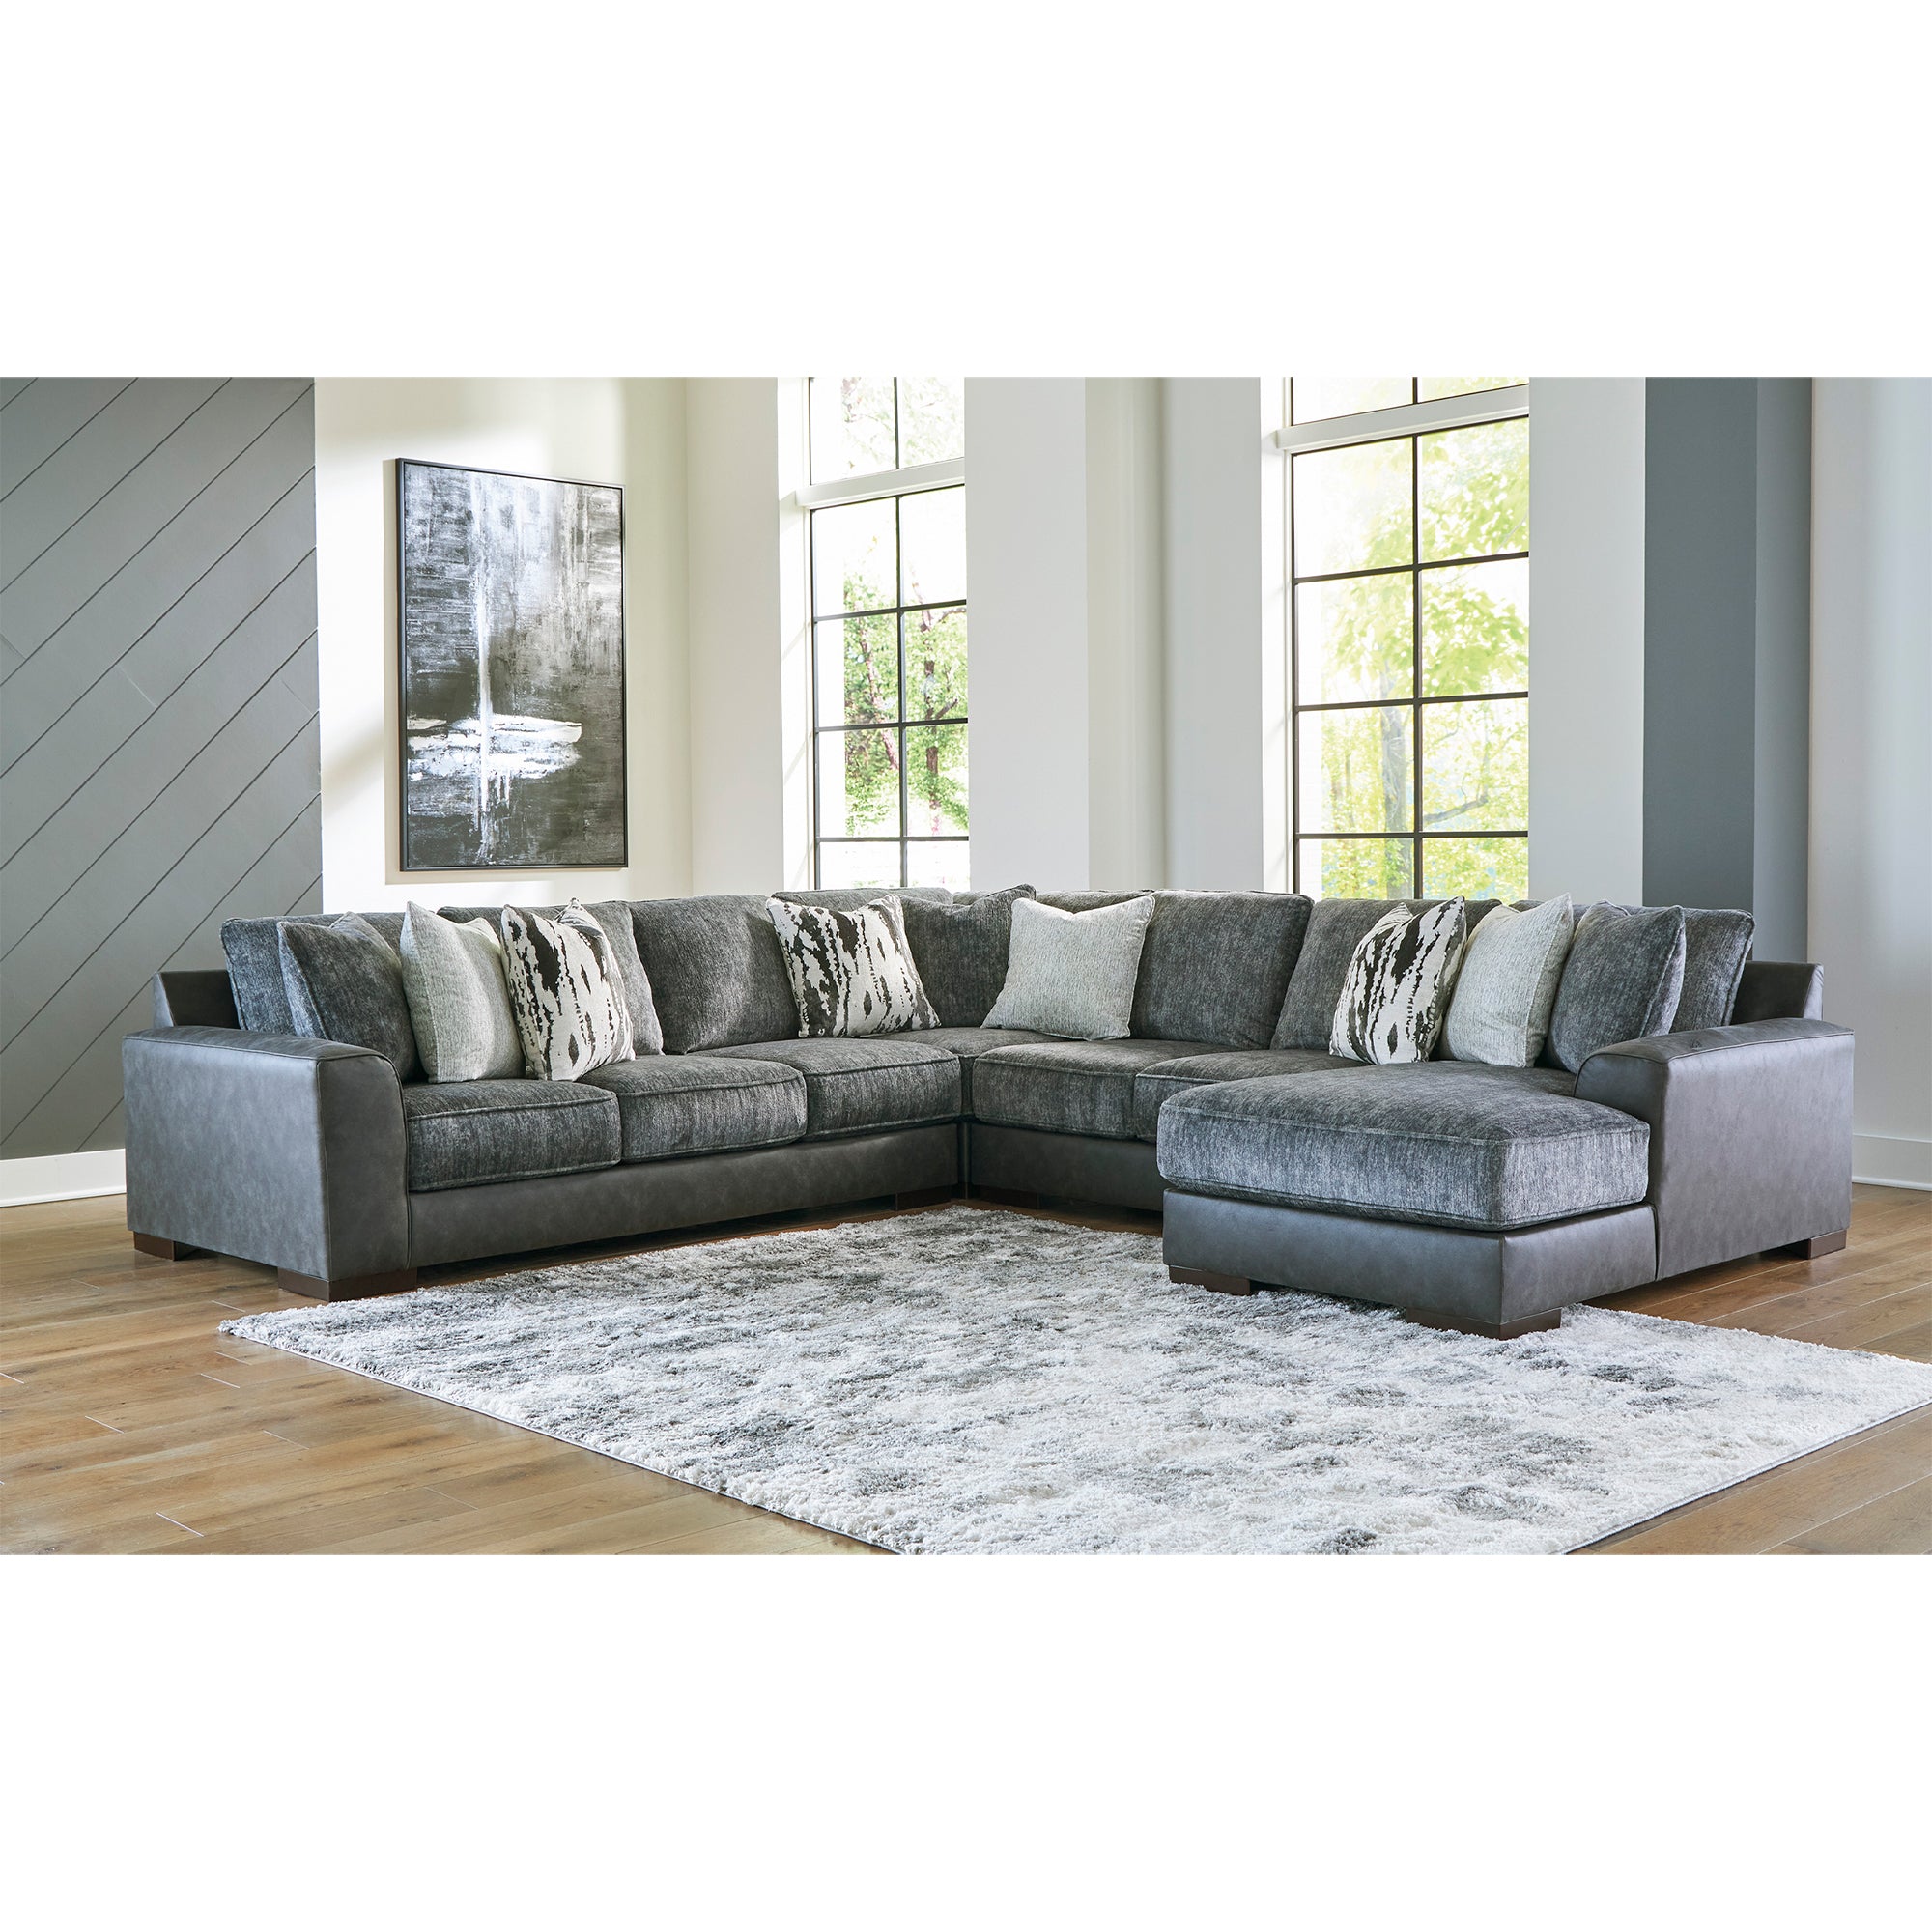 Larkstone 4-Piece Sectional with Chaise in Pewter Color